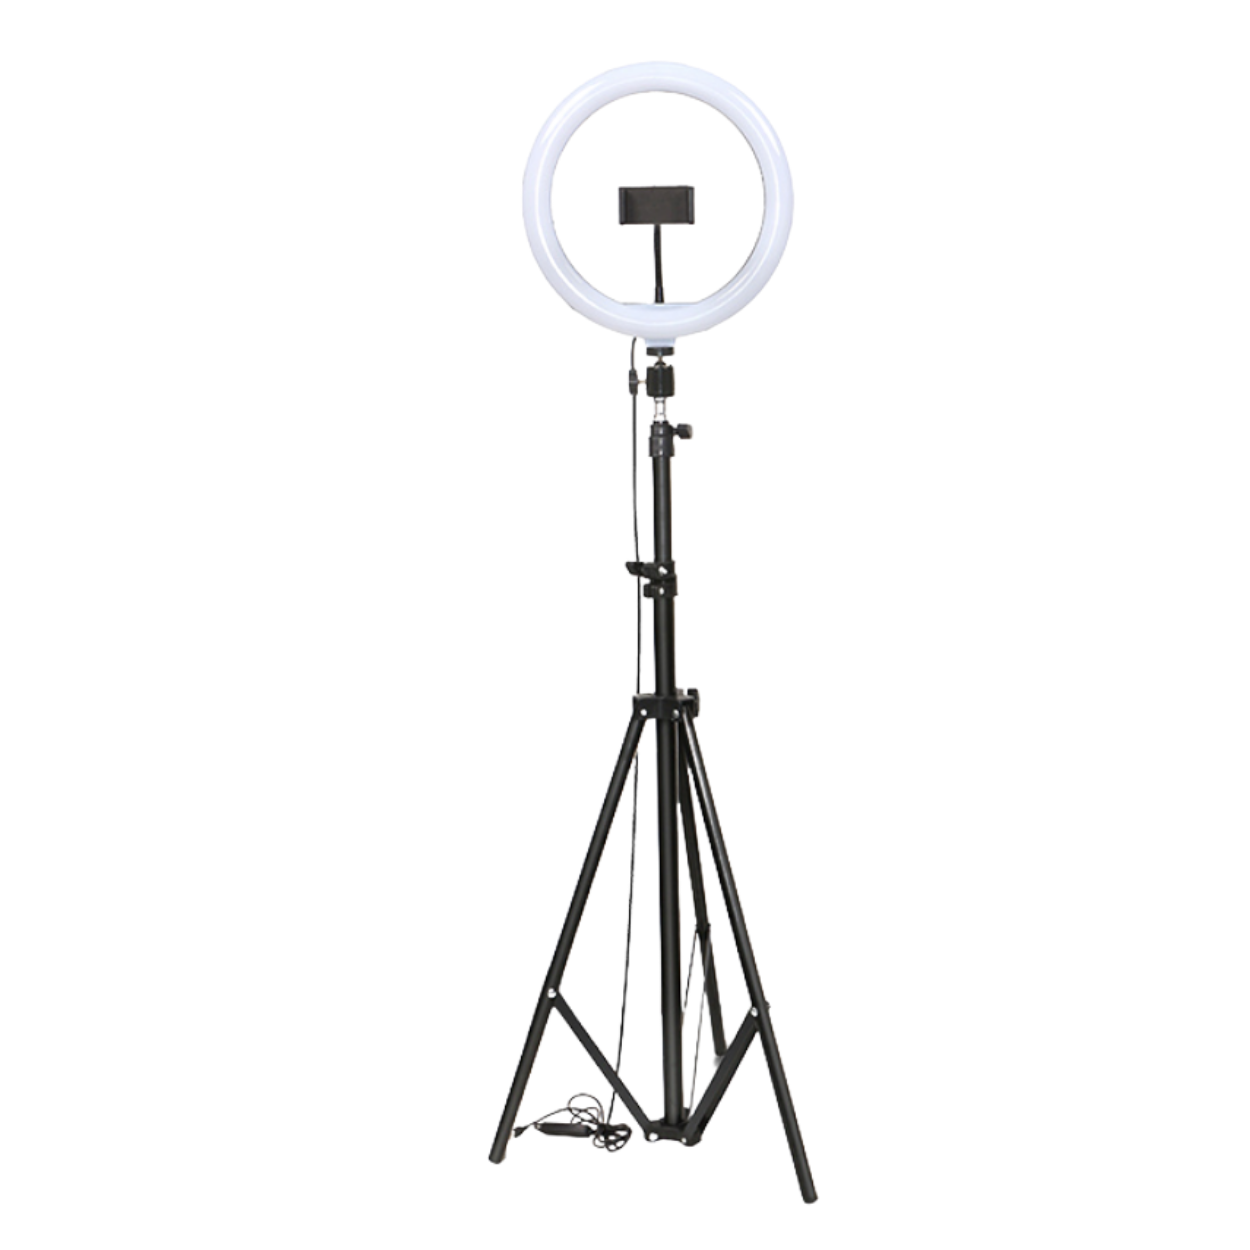 NEOWOOD BY-L206+B20-C21 LIVE STREAMING STAND (BEAUTY LAMP), NEOWOOD, STAND, neowood-stand-neo-by-l206-b20-c21, ZOSO MUSIC SDN BHD